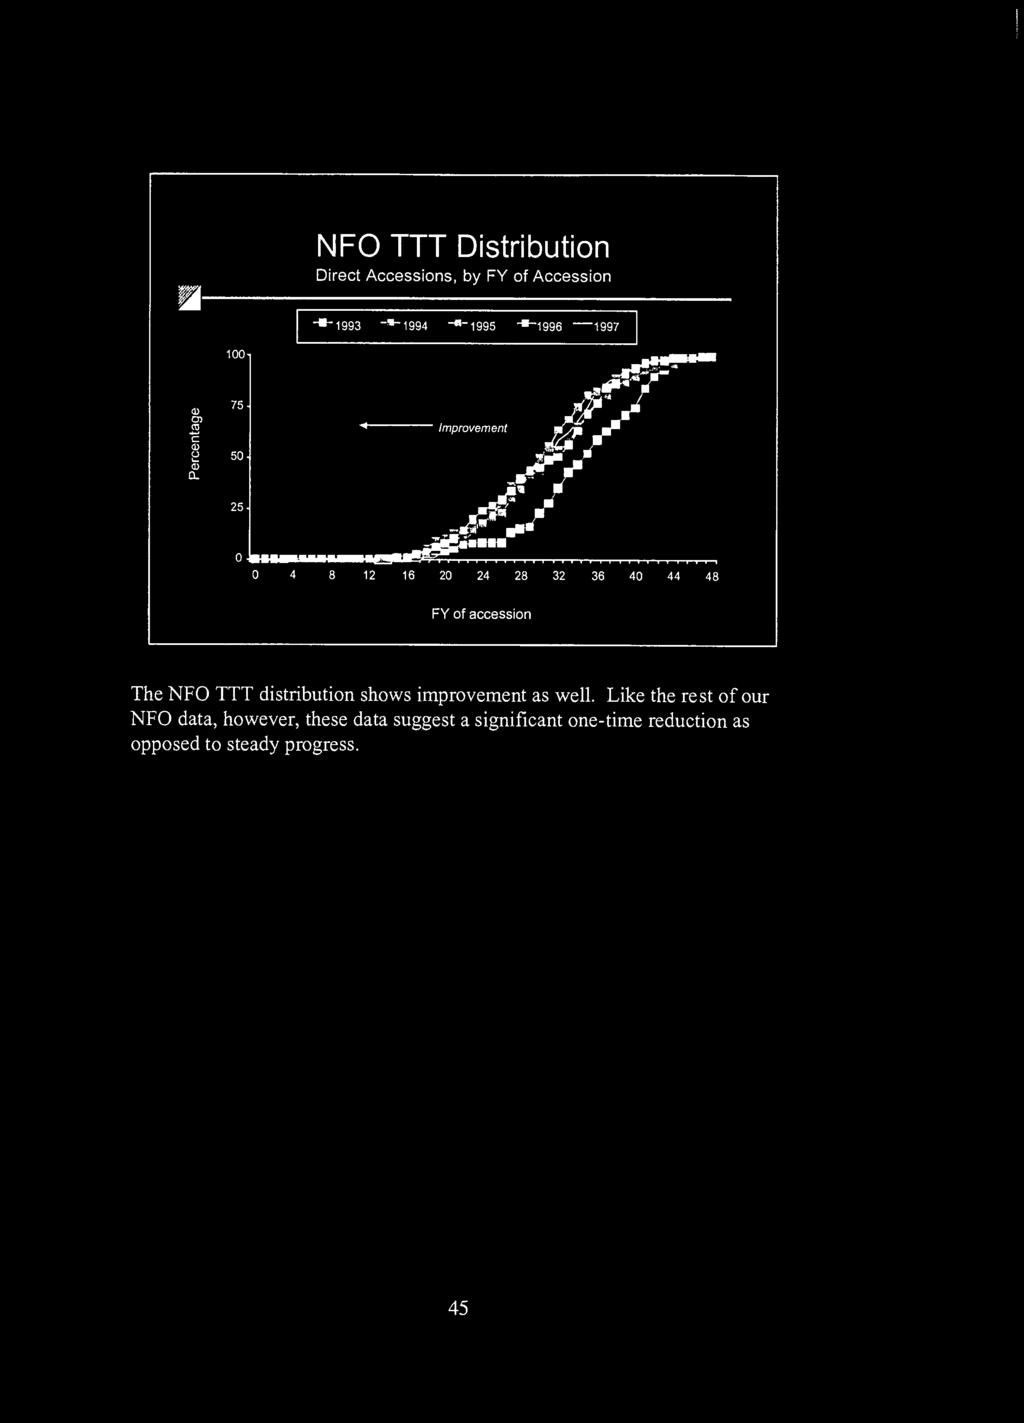 V^M NFO 1 1 1 Distribution Direct Accessions, by FY of Accession " -1993 - "1994 -"-1995 -"-1996 1997 100- ra c g 50. Q-.